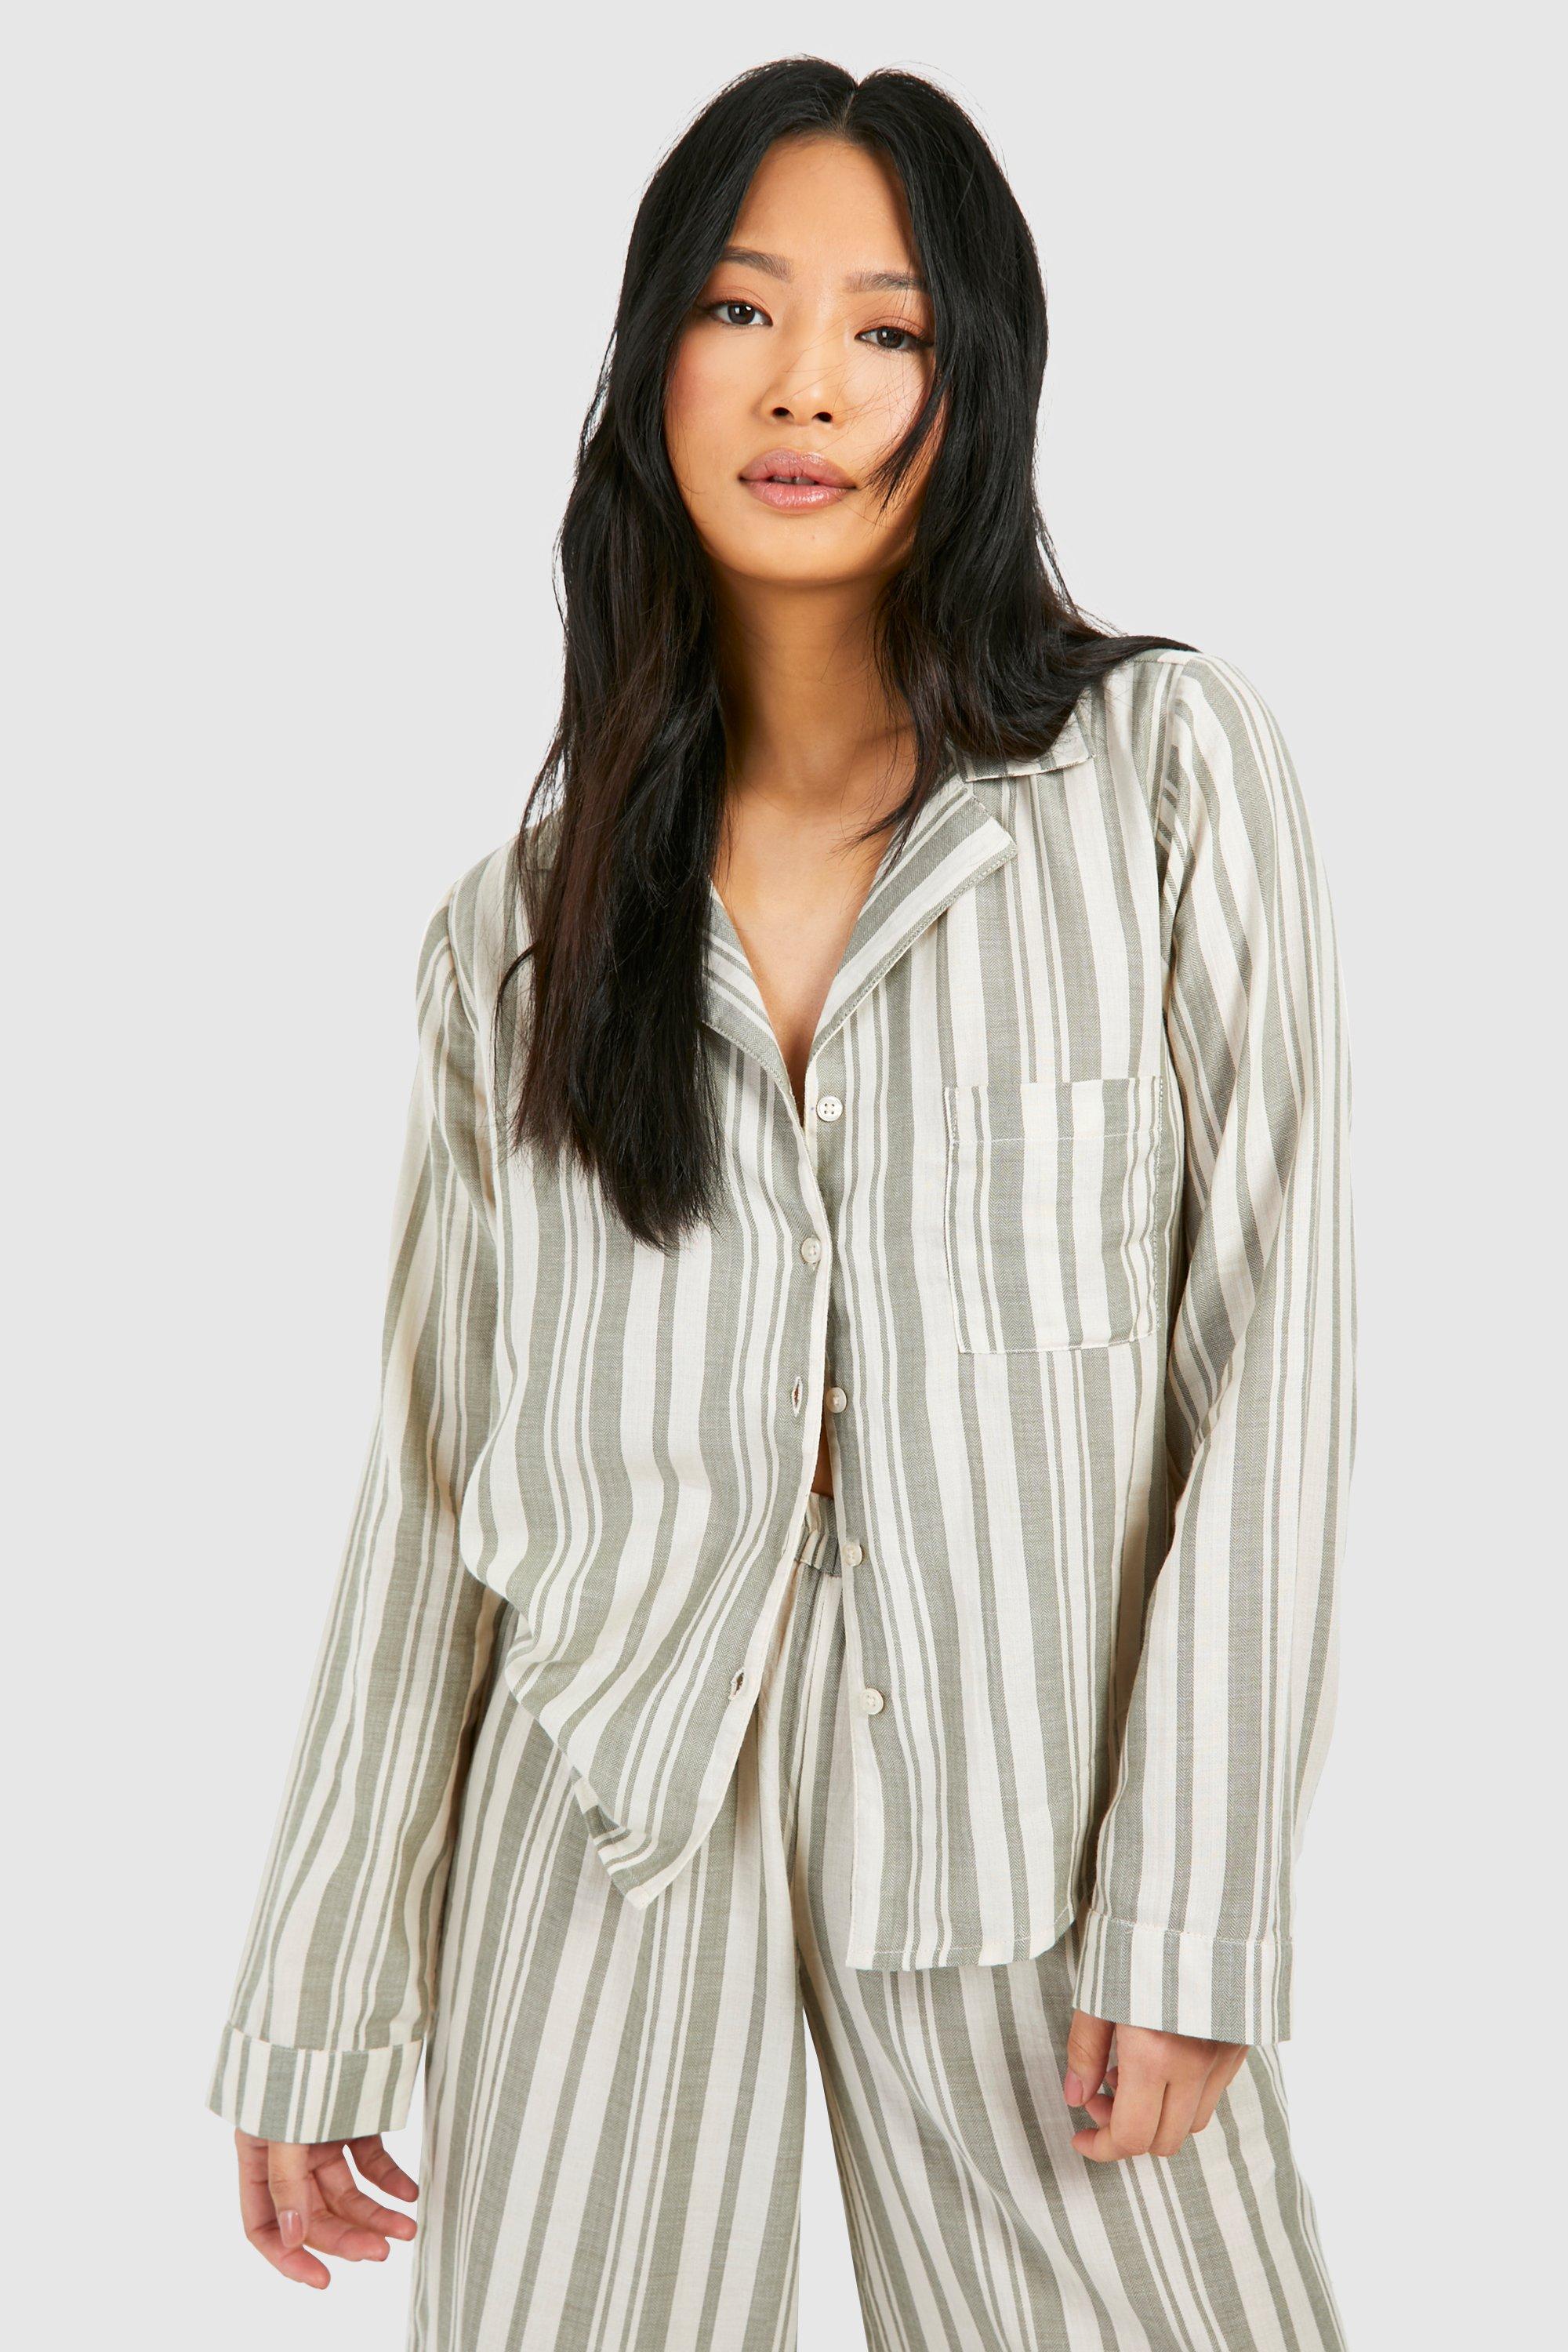 Image of Petite Stripe Button Up Shirt, Beige